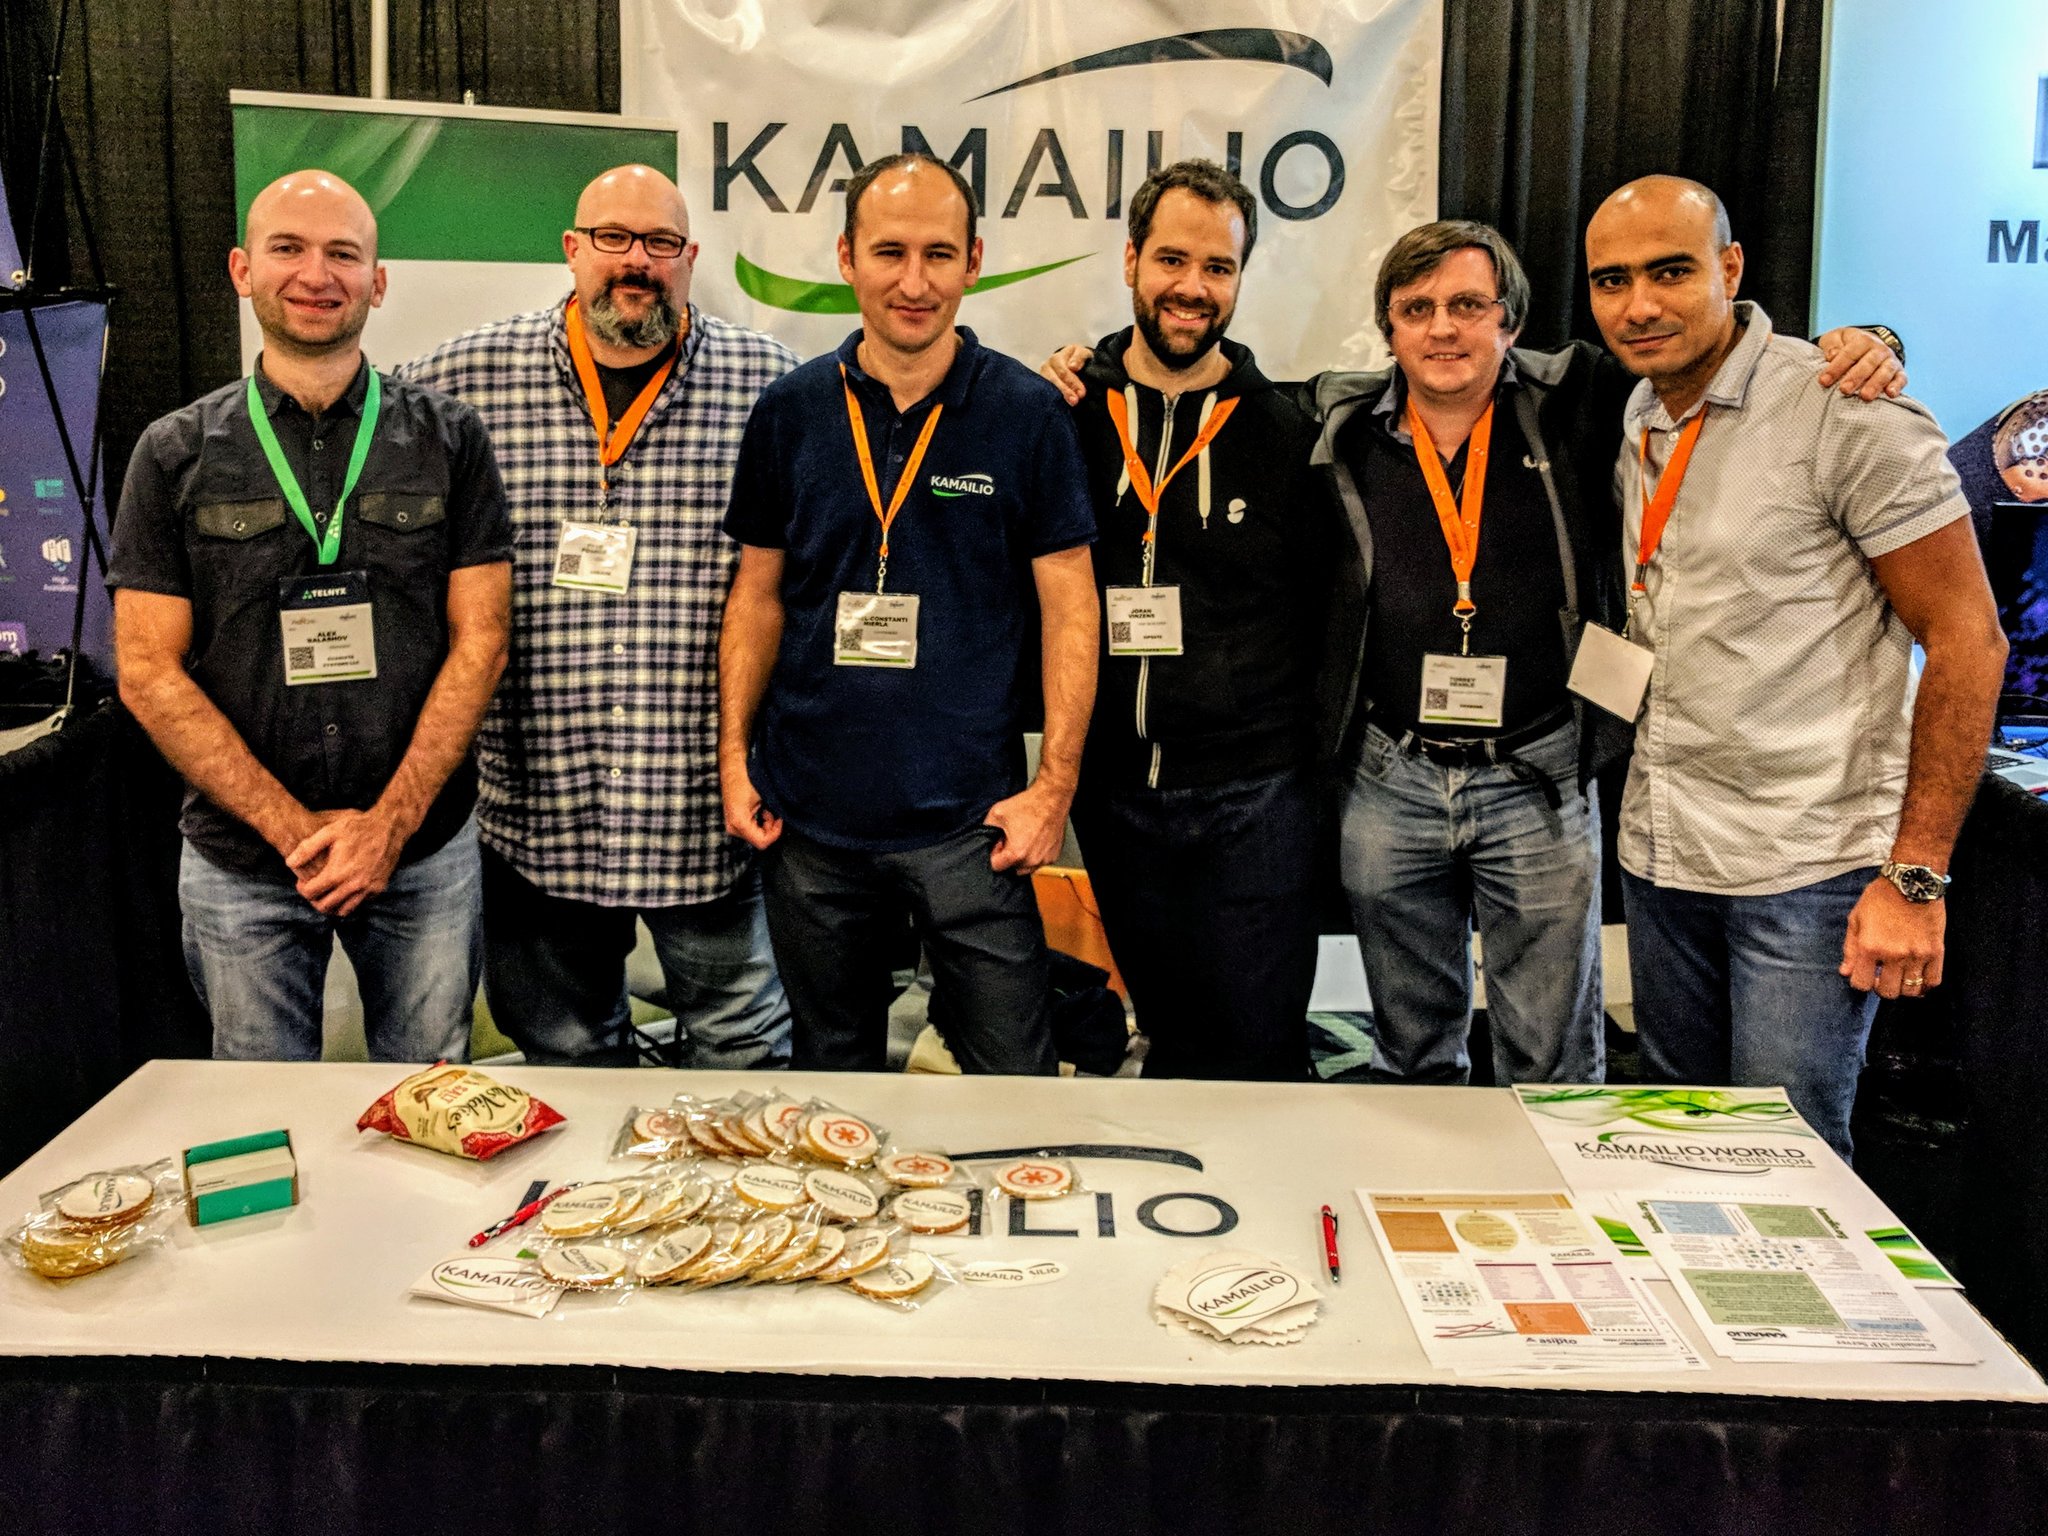 Fred Posner with other Kamailians at Astricon